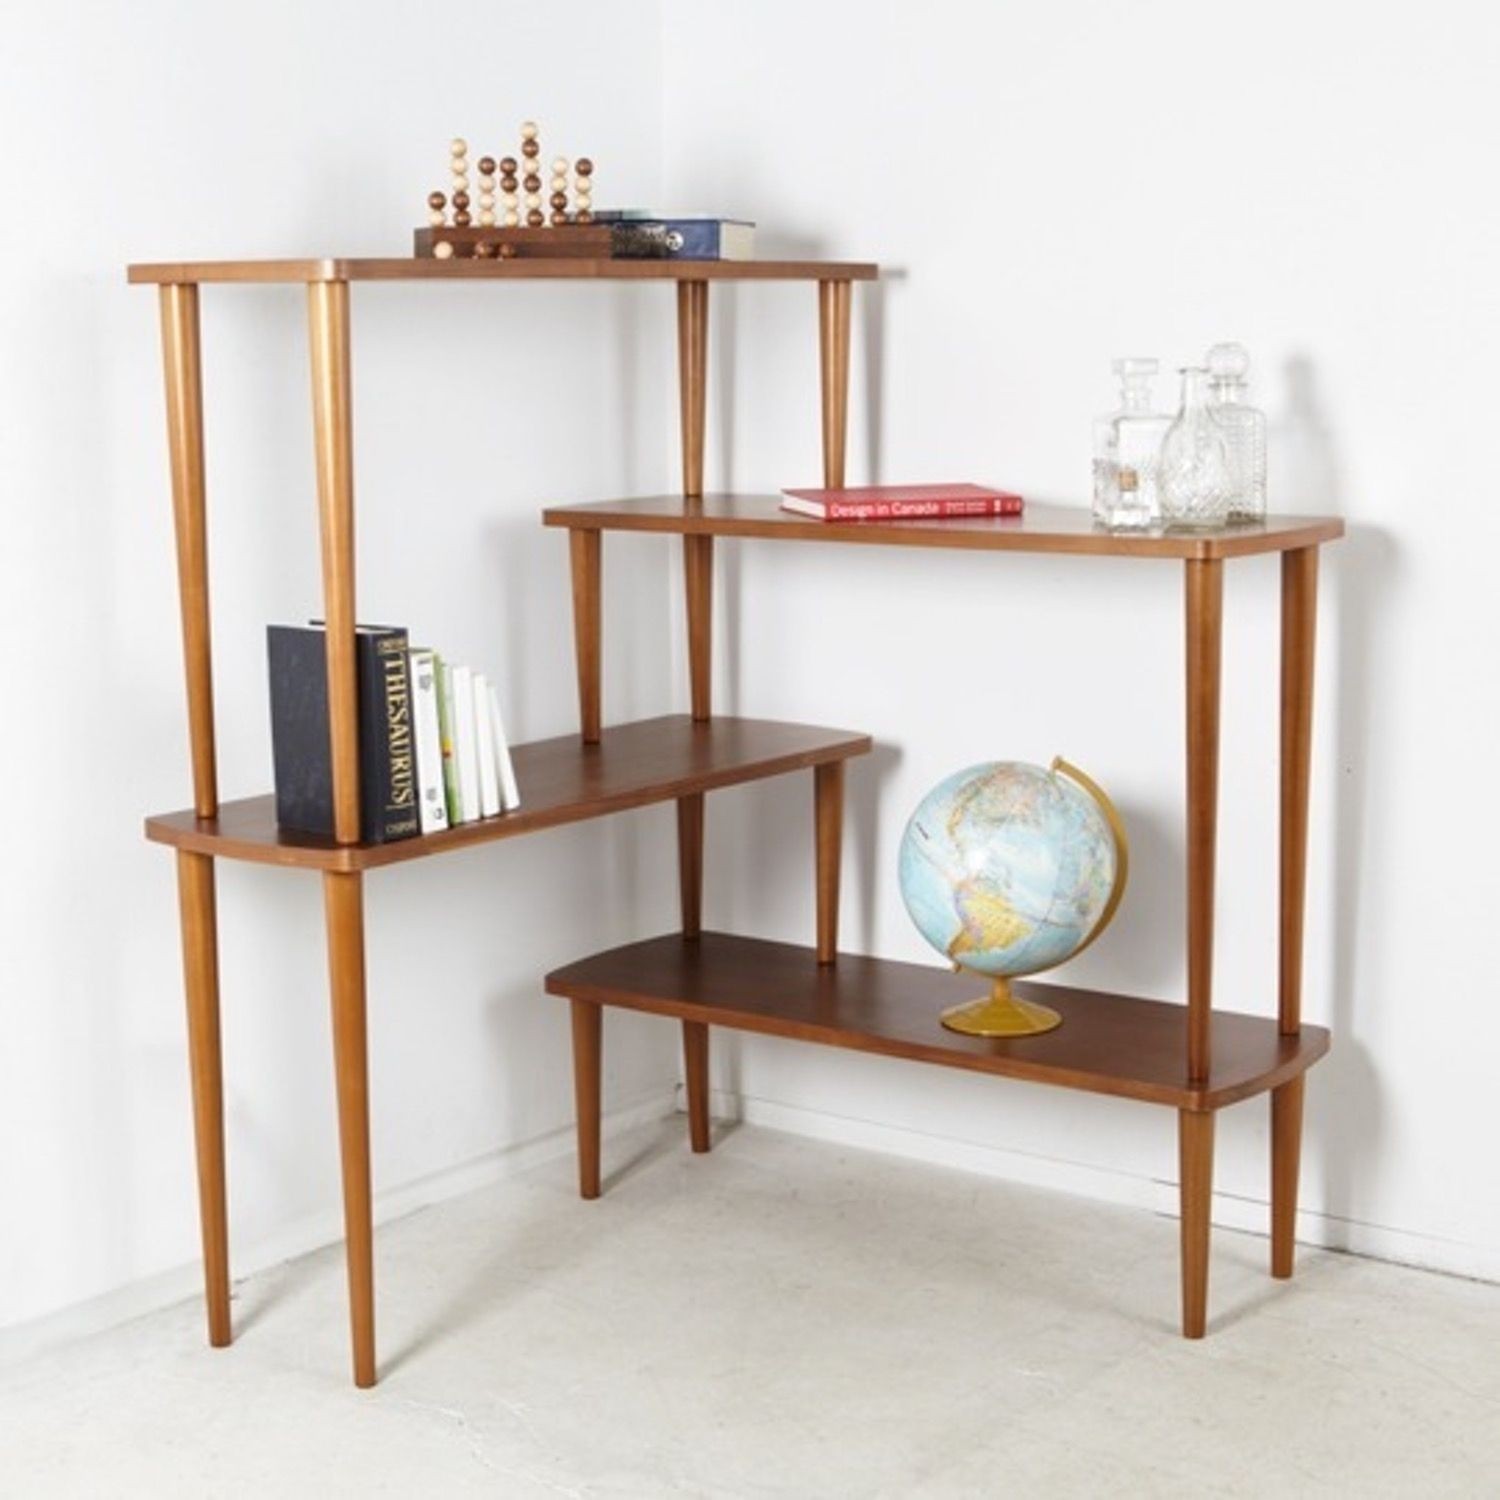 This corner shelf has multiple stacking configurations so you dont